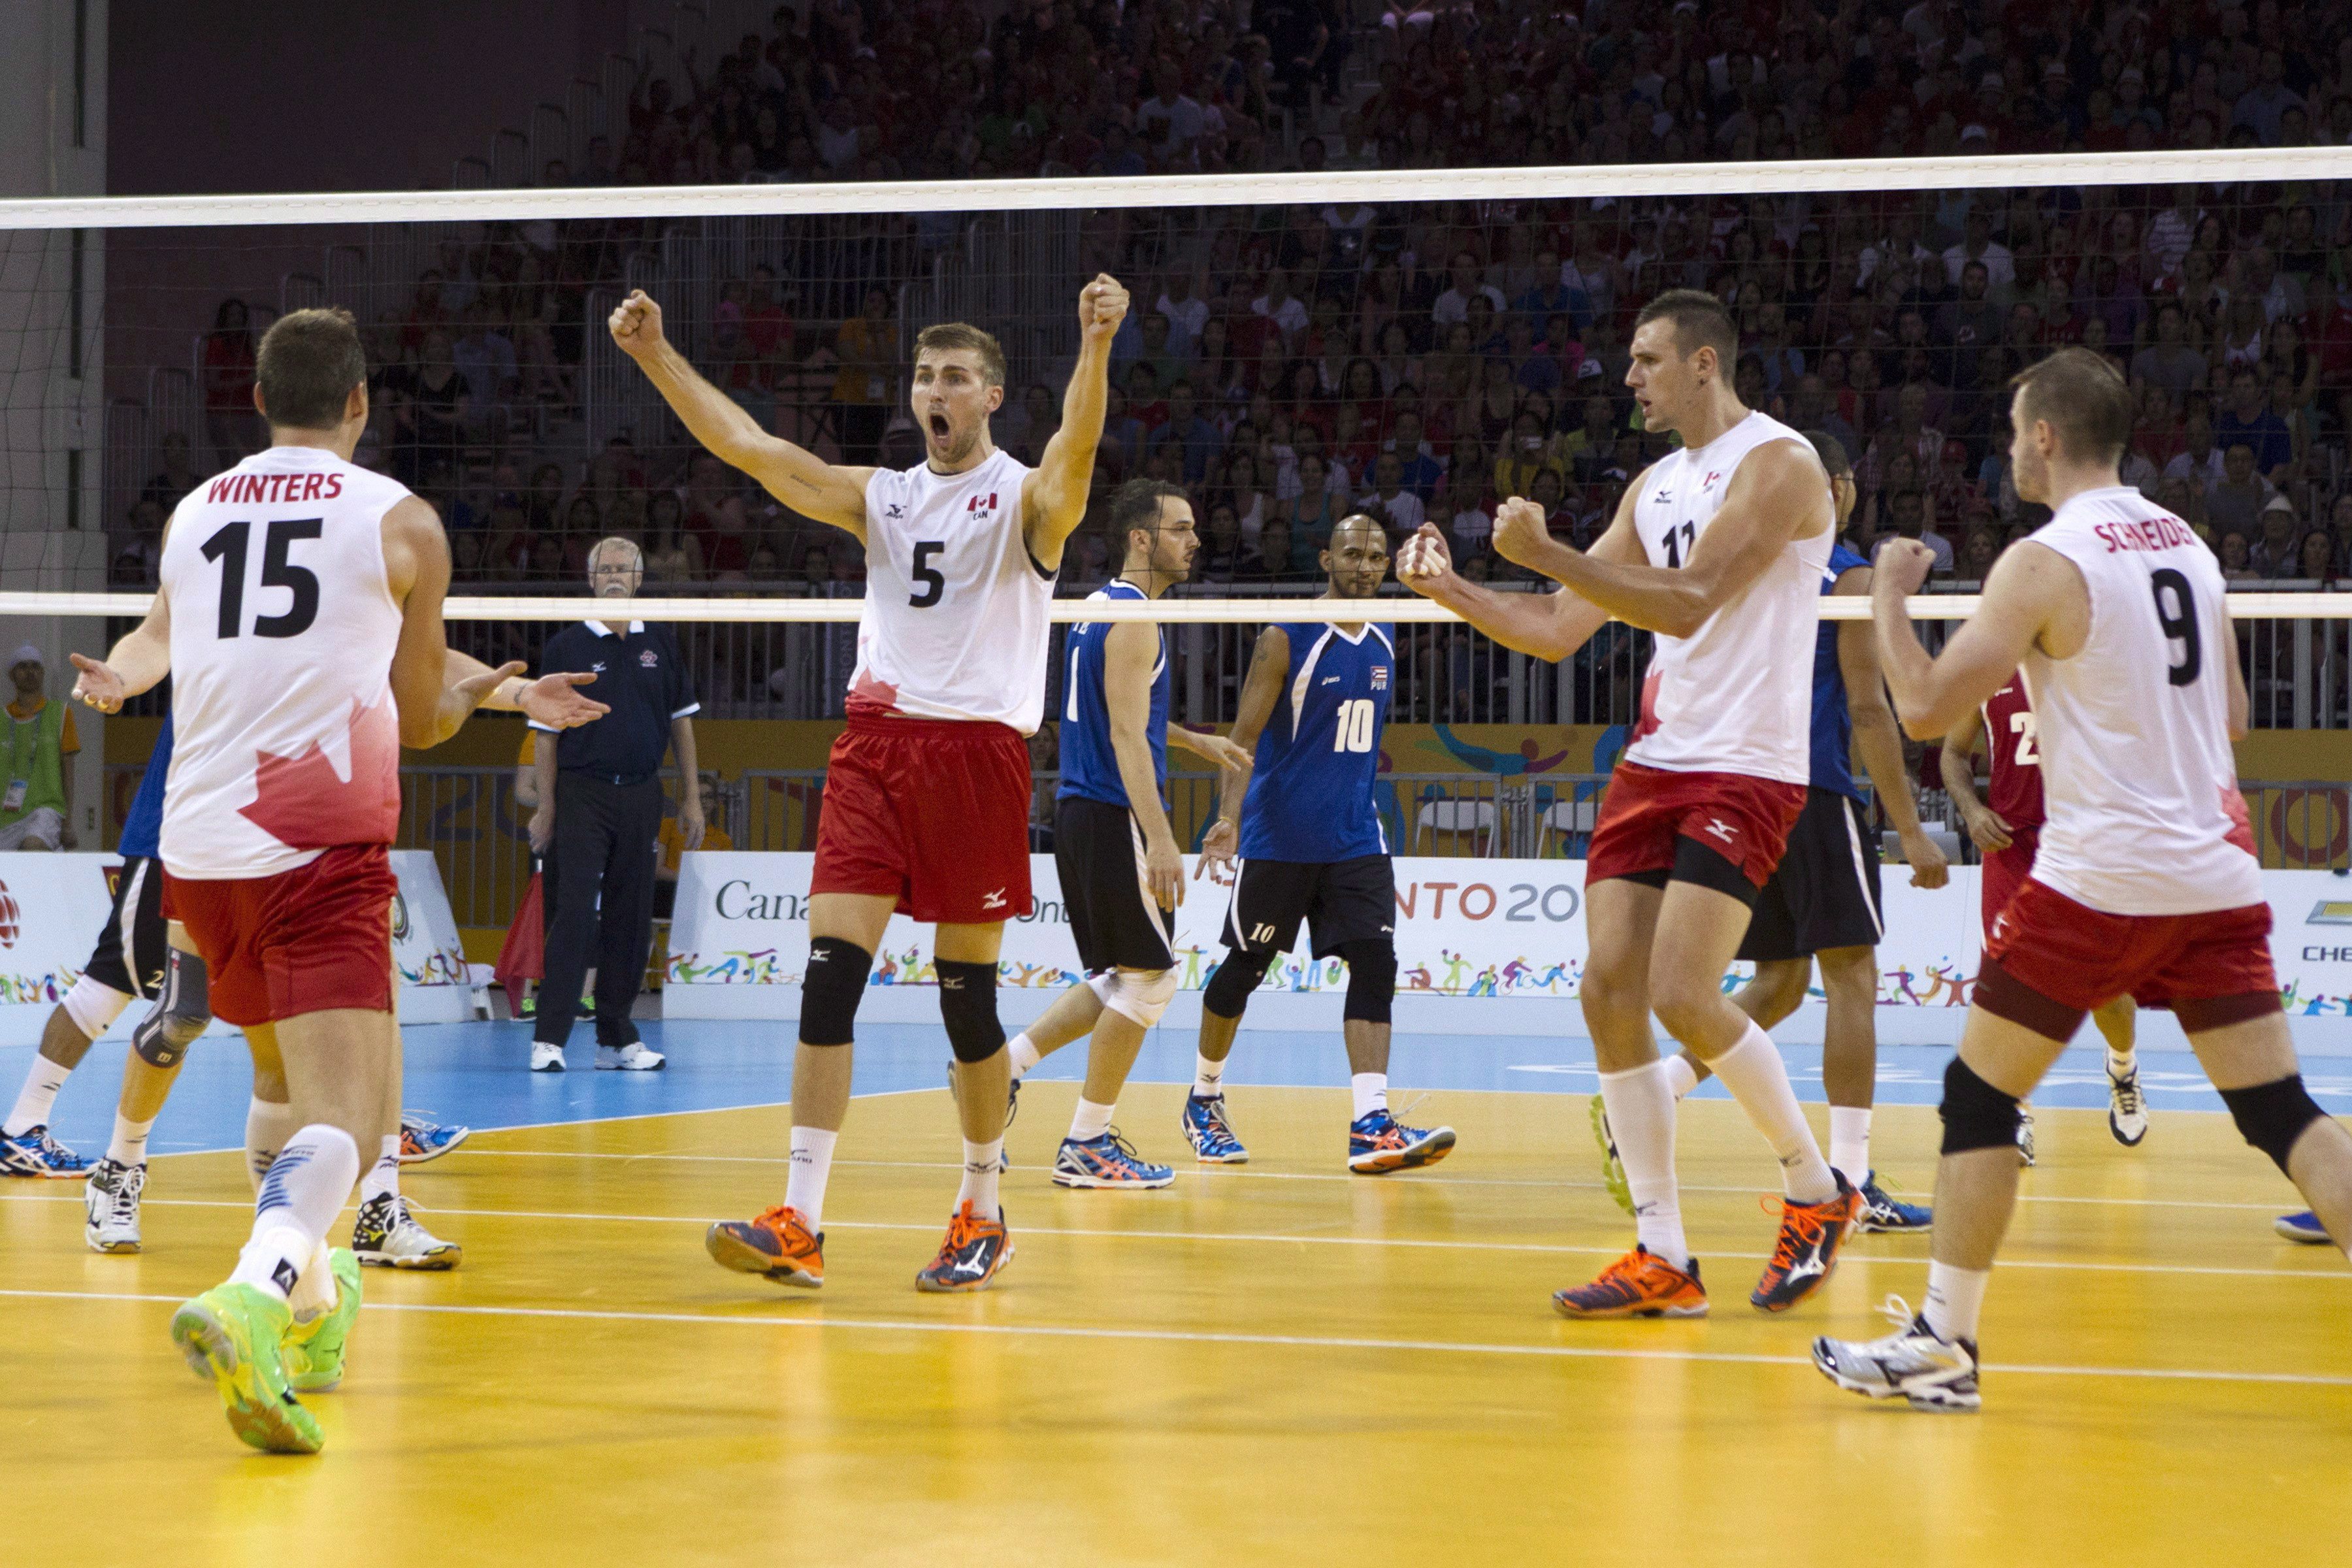 Members of the Canadian men's volleyball team celebrate a point during their 3-1 win over Puerto Rico in the men's volleyball bronze medal game at the Pan Am Toronto 2015 games in Toronto on Sunday, July 26, 2015. THE CANADIAN PRESS/Chris Young